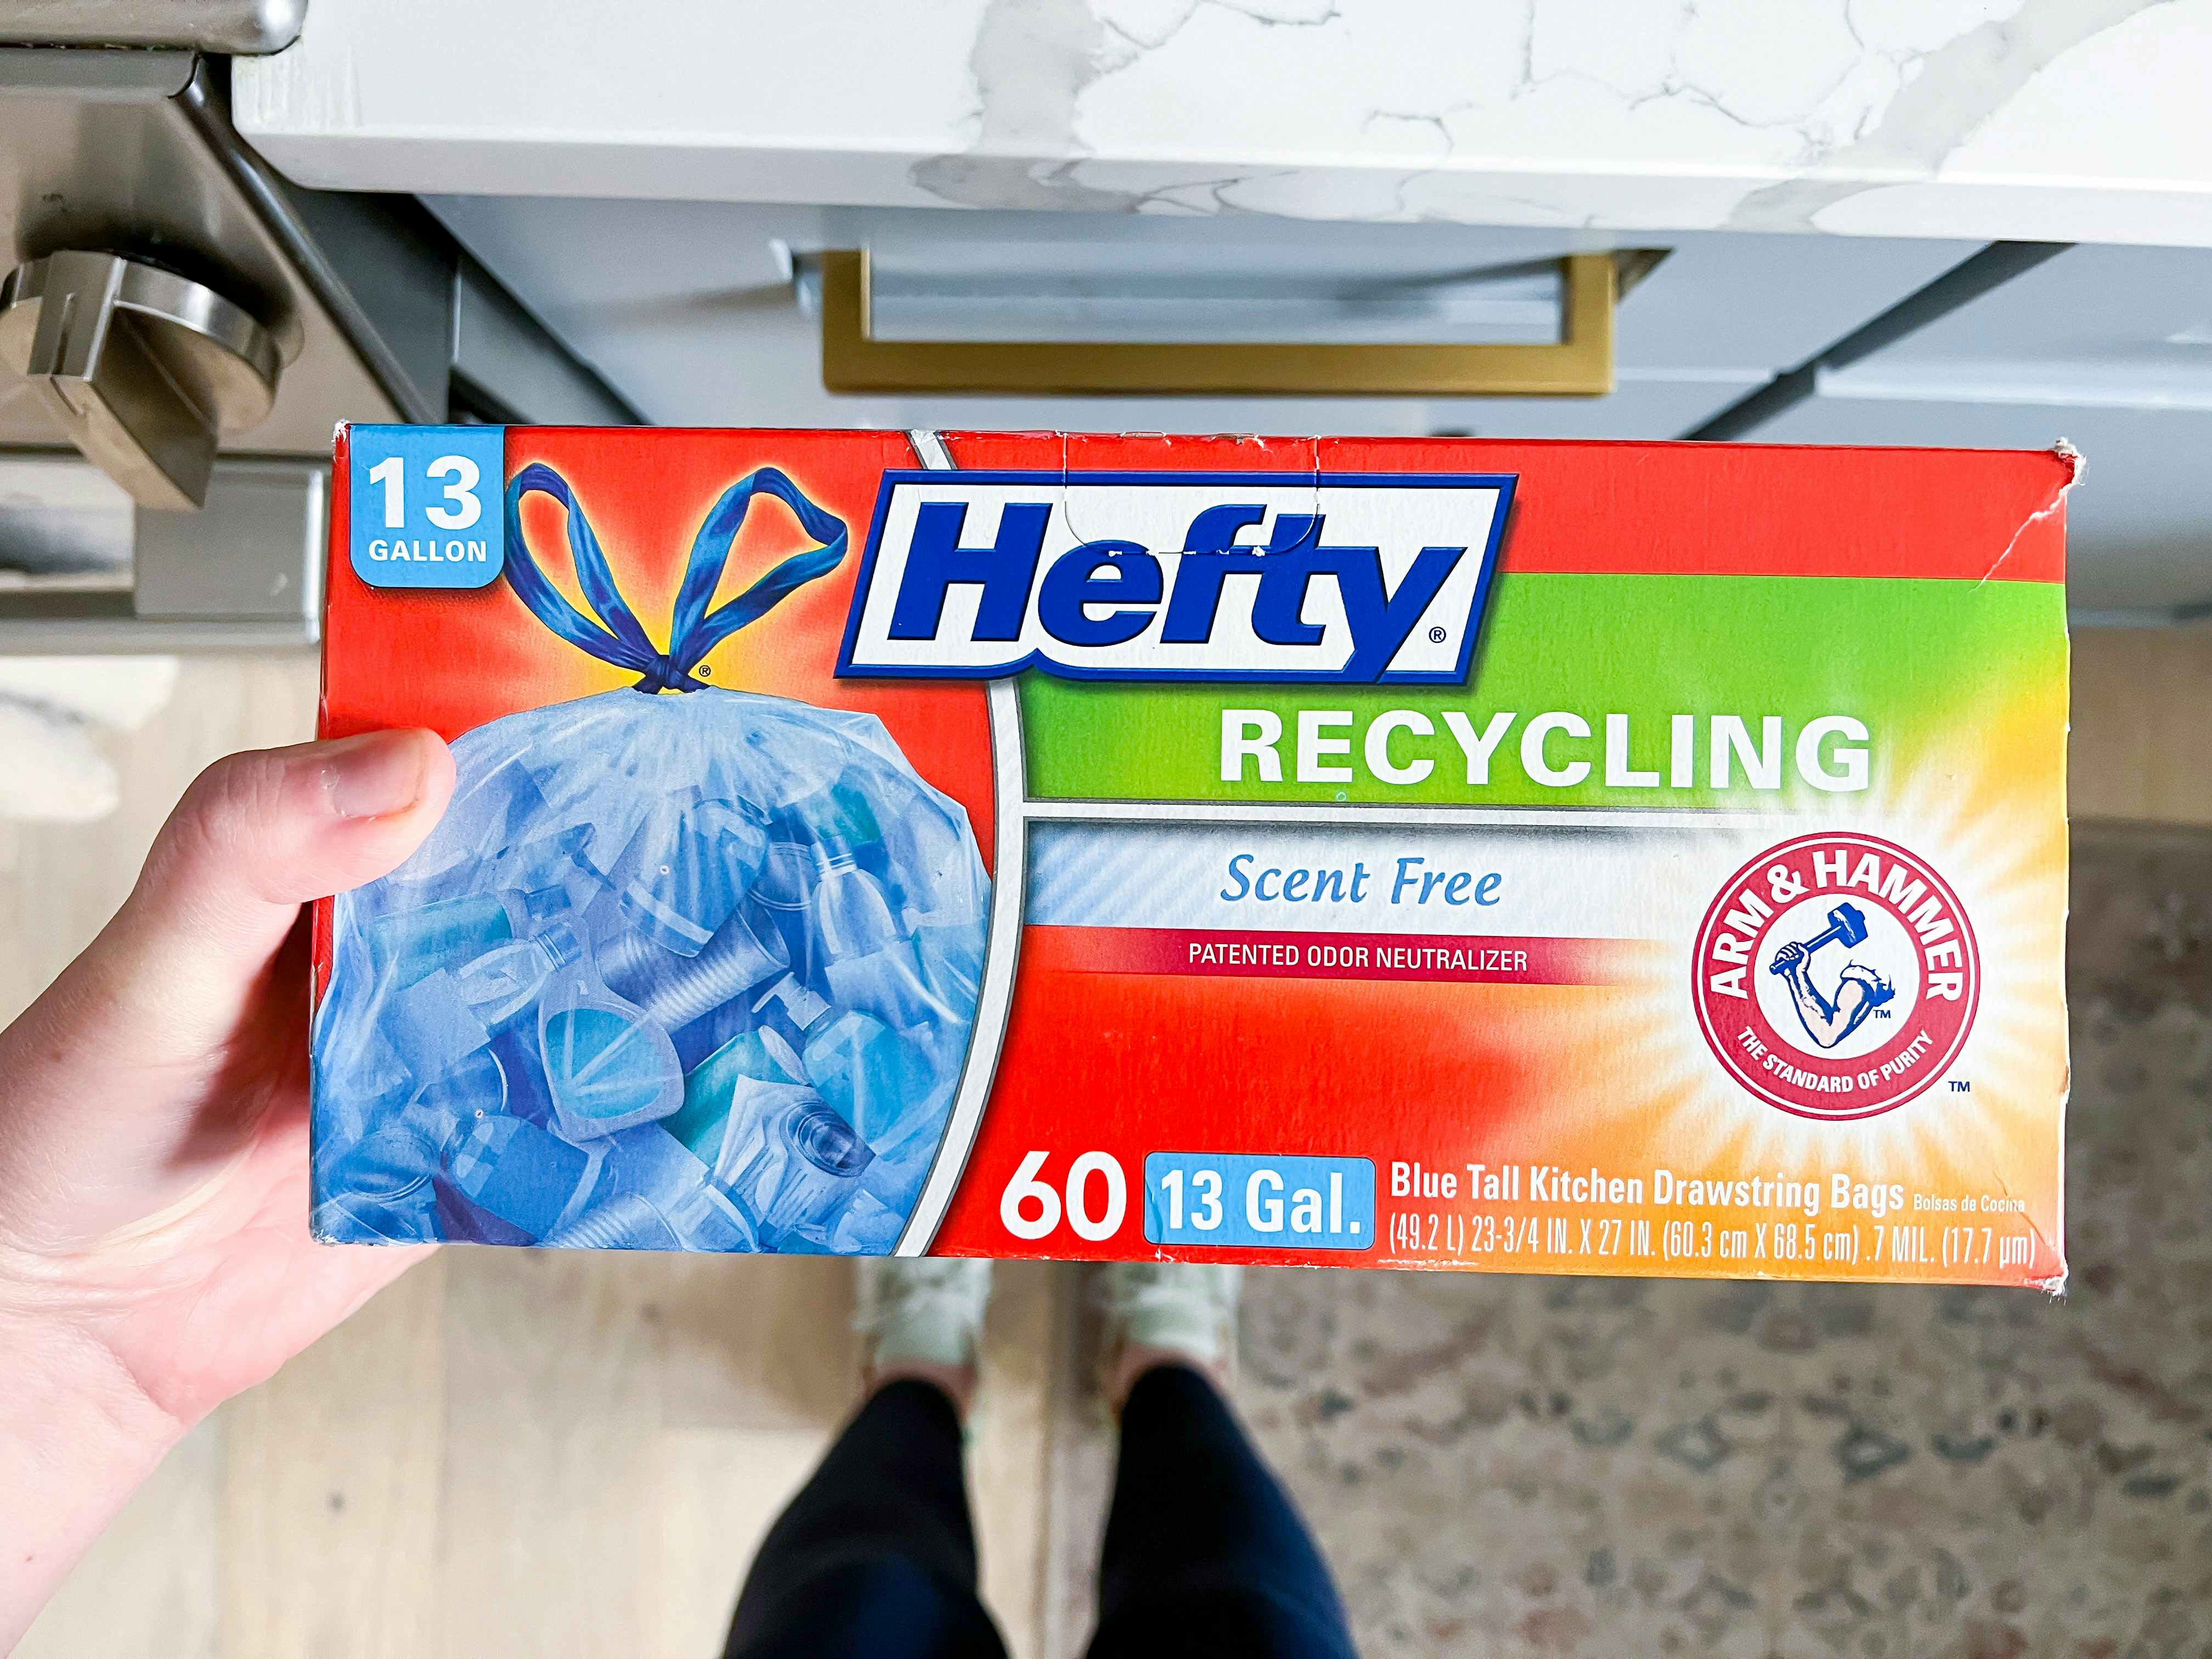 The Best Place to Find Cheap Trash Bags Isn't Where You Think - The Krazy  Coupon Lady